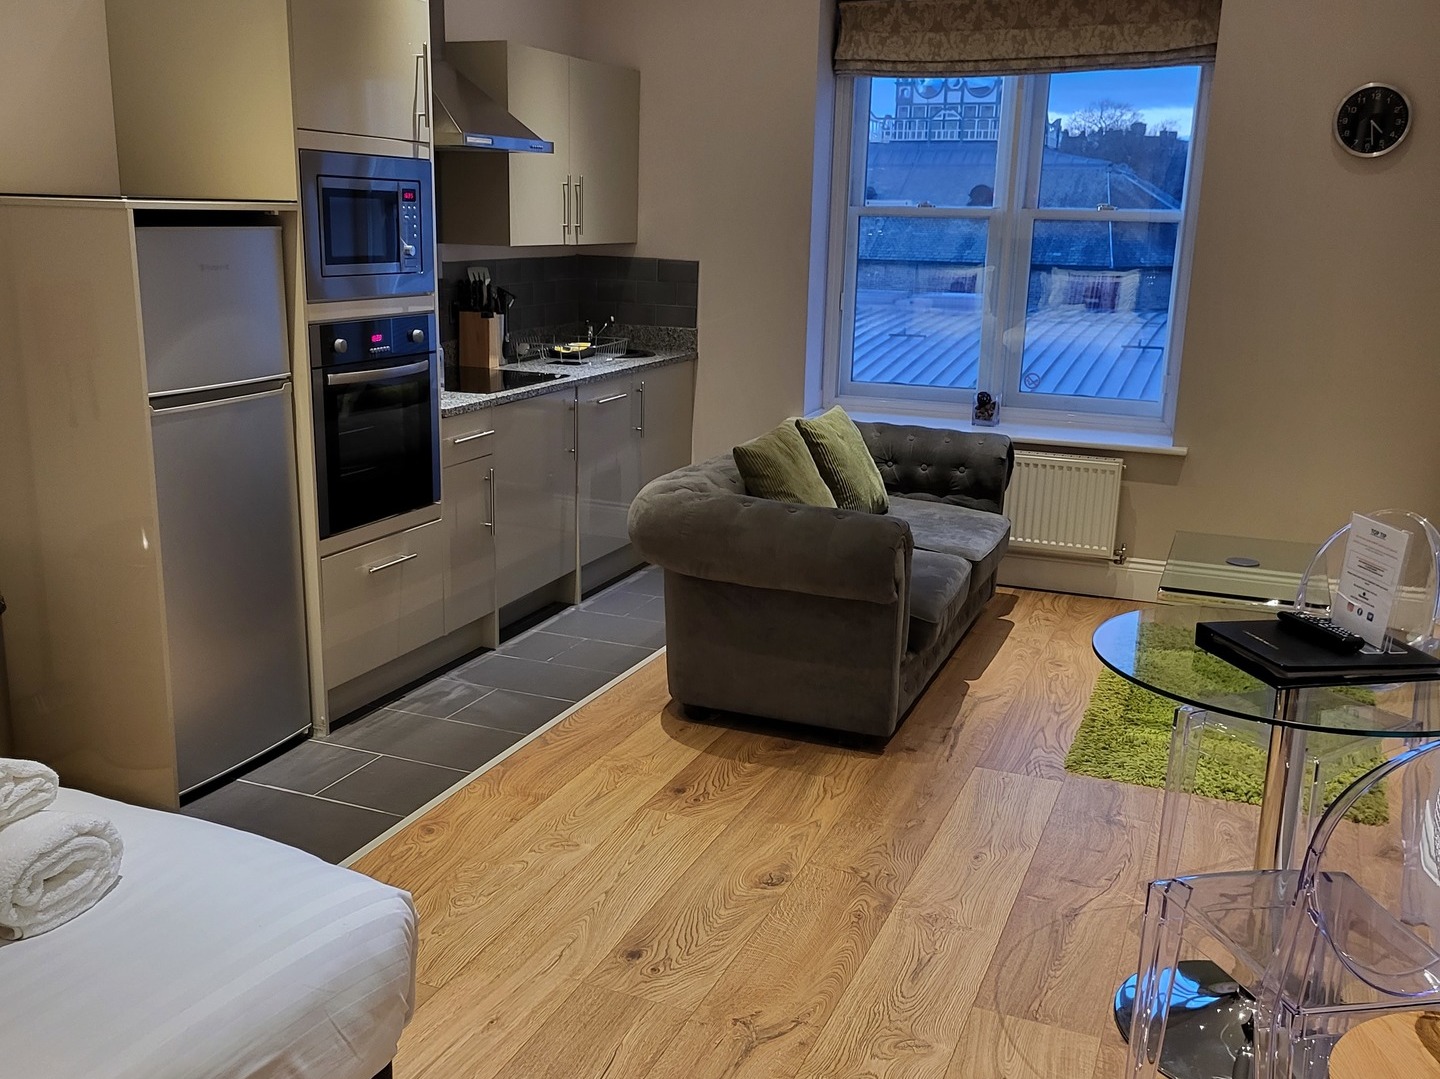 luxury studio apartment harrogate town centre to rent or stay in like a hotel